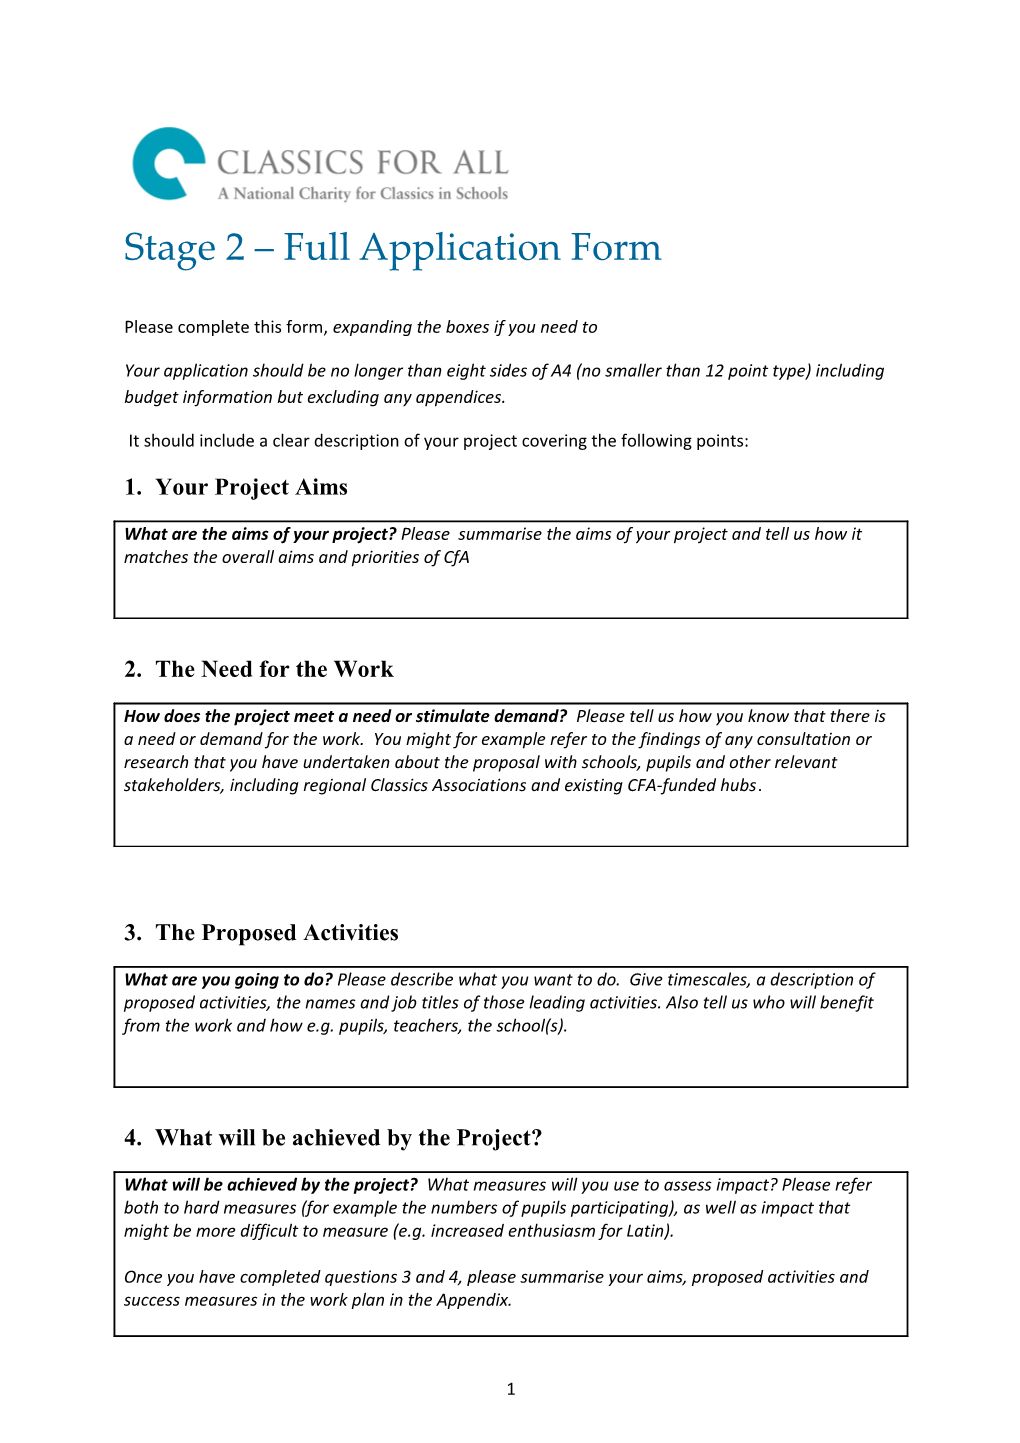 Stage 2 Full Application Form